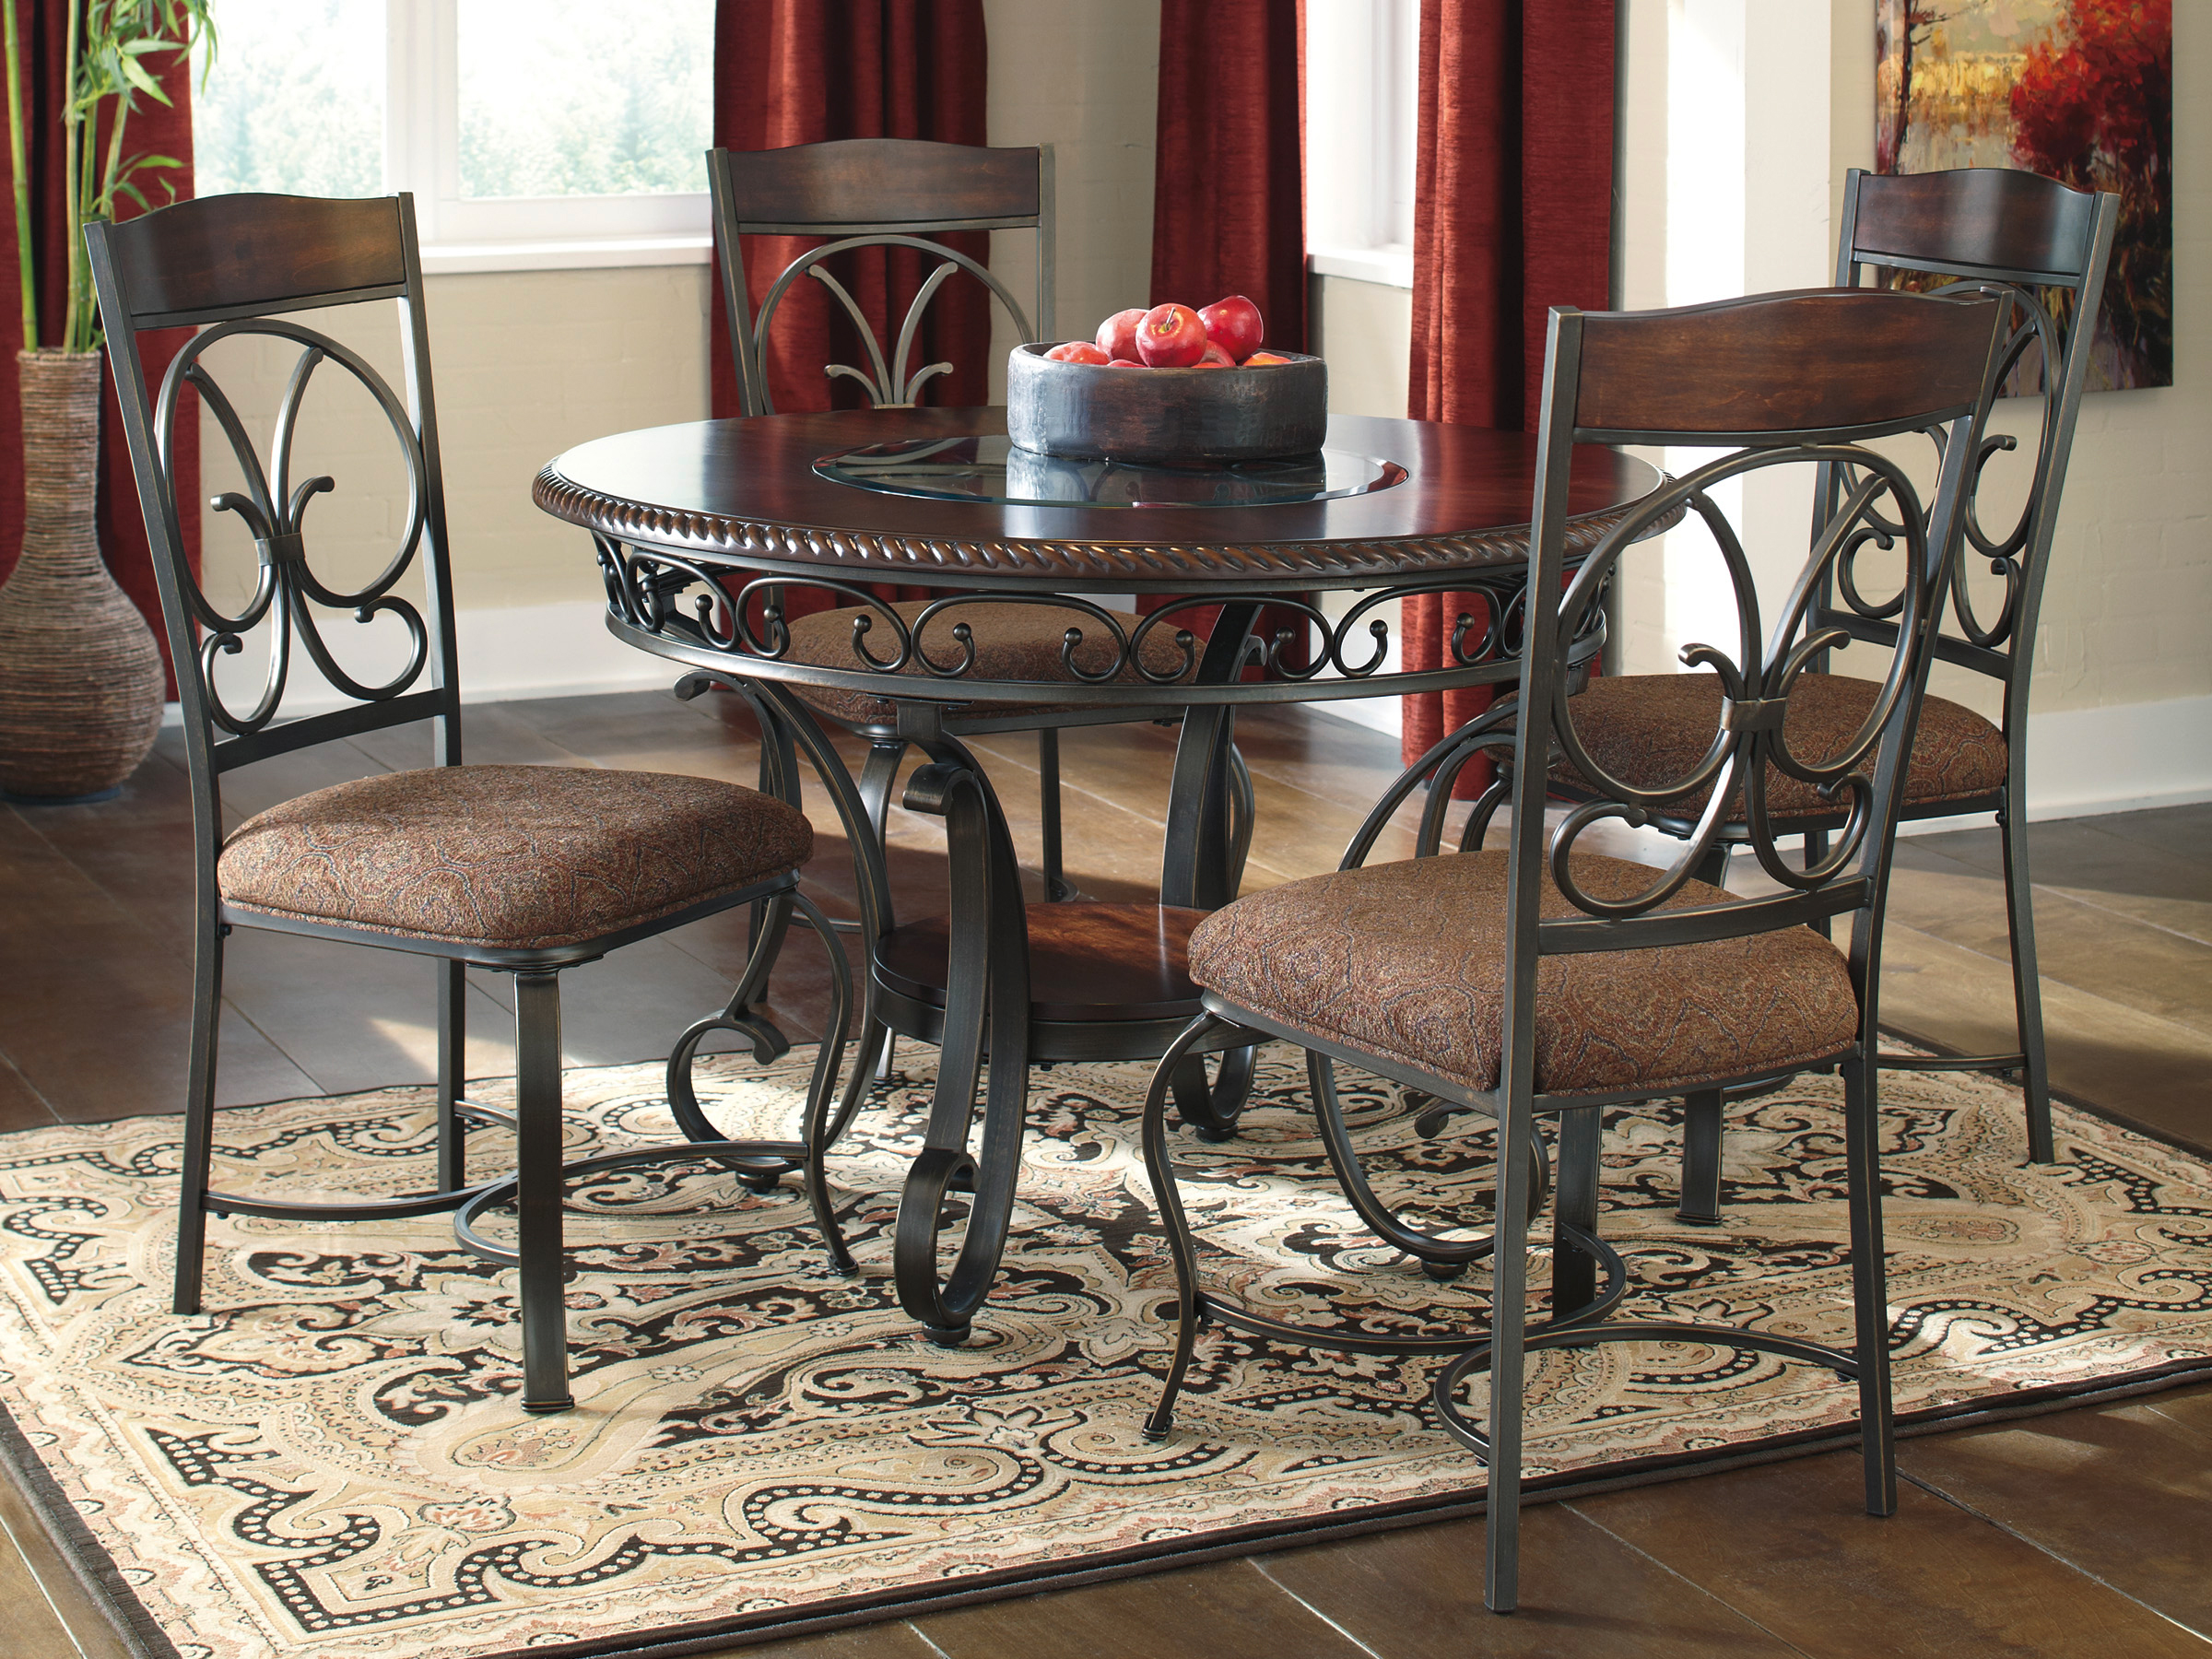 77a32977, Old World Round Dining Room Sets